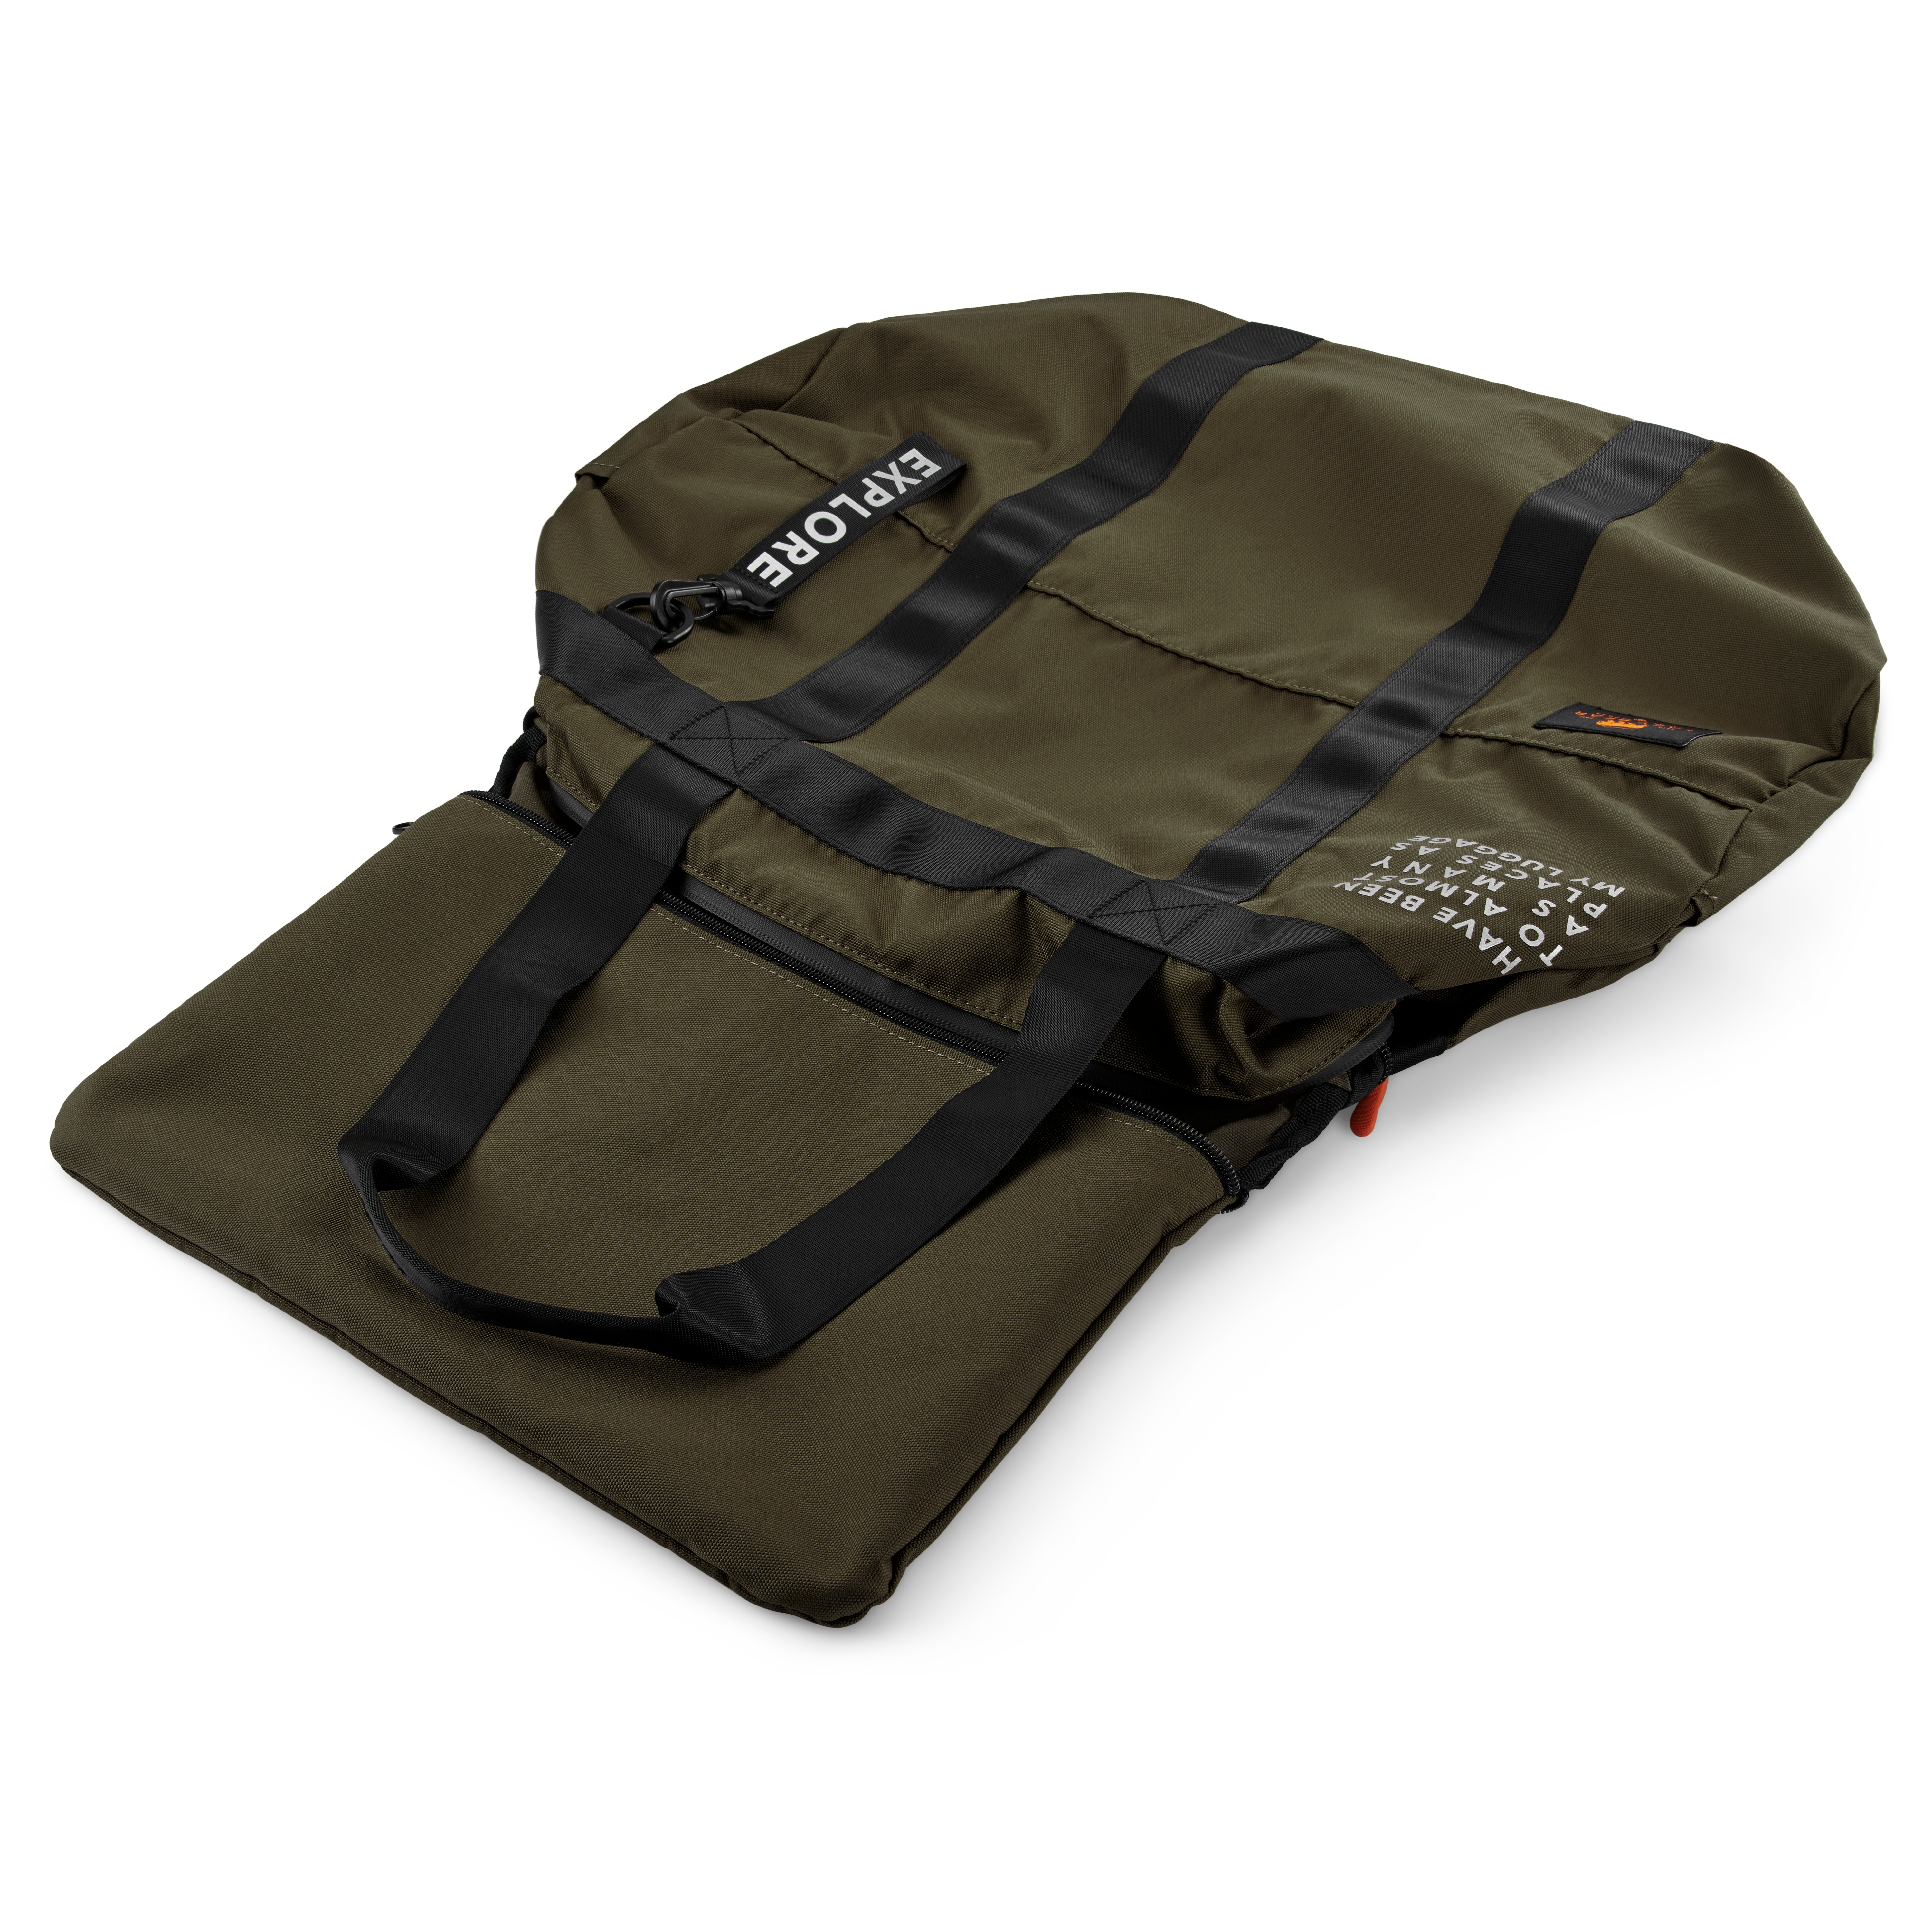 Nomad Duffel Bag — MOHAVE CANNABIS CO.